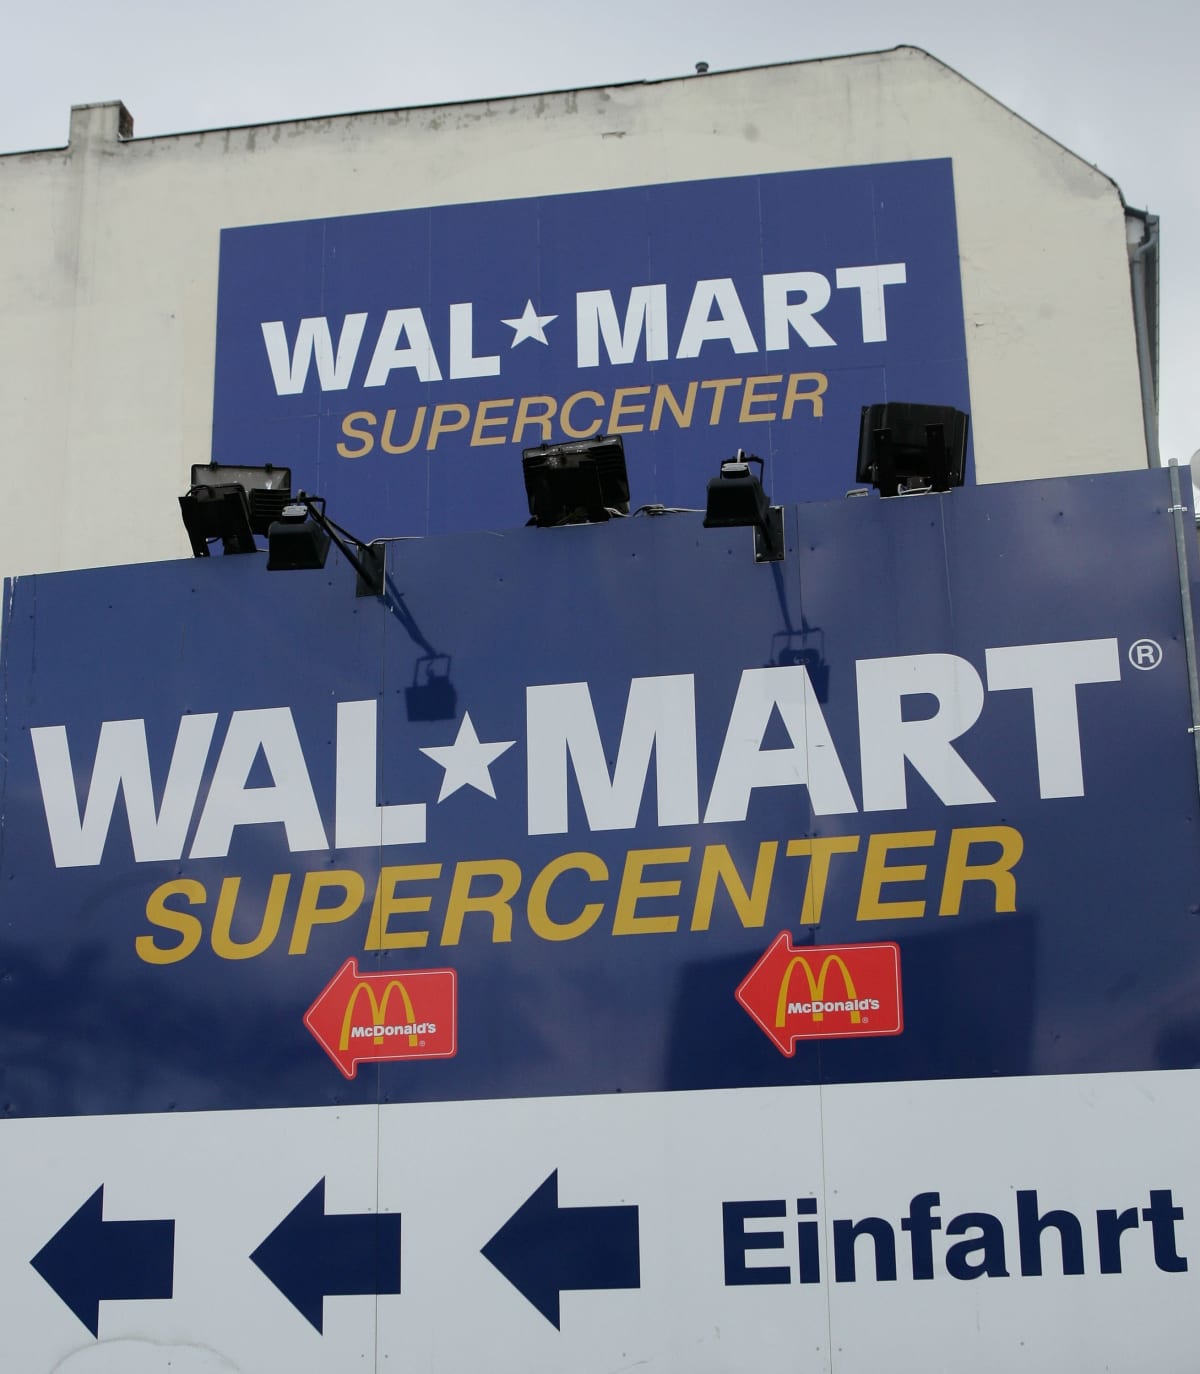 BERLIN - MARCH 2:  Signs advertise the entrance to a Wal-Mart store March 2, 2006 in Berlin, Germany. According to March 2 news reports Wal-Mart suffered losses totaling in the lower hundreds of millions of Euros for its German operations in 2005.    (Photo by Sean Gallup/Getty Images)